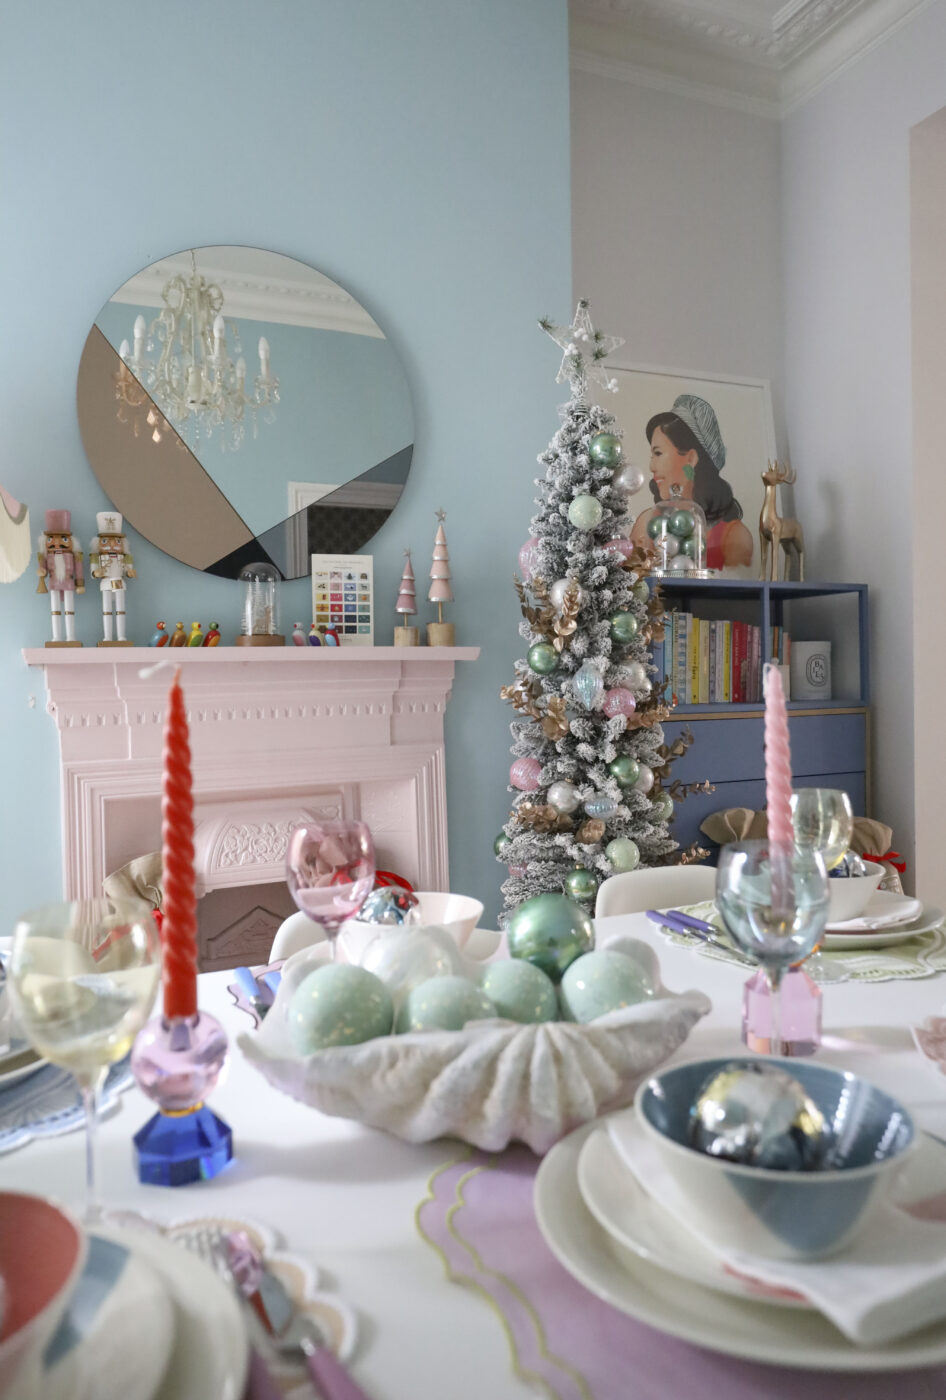 Top 5 tips for fast and easy Christmas decorating at home.